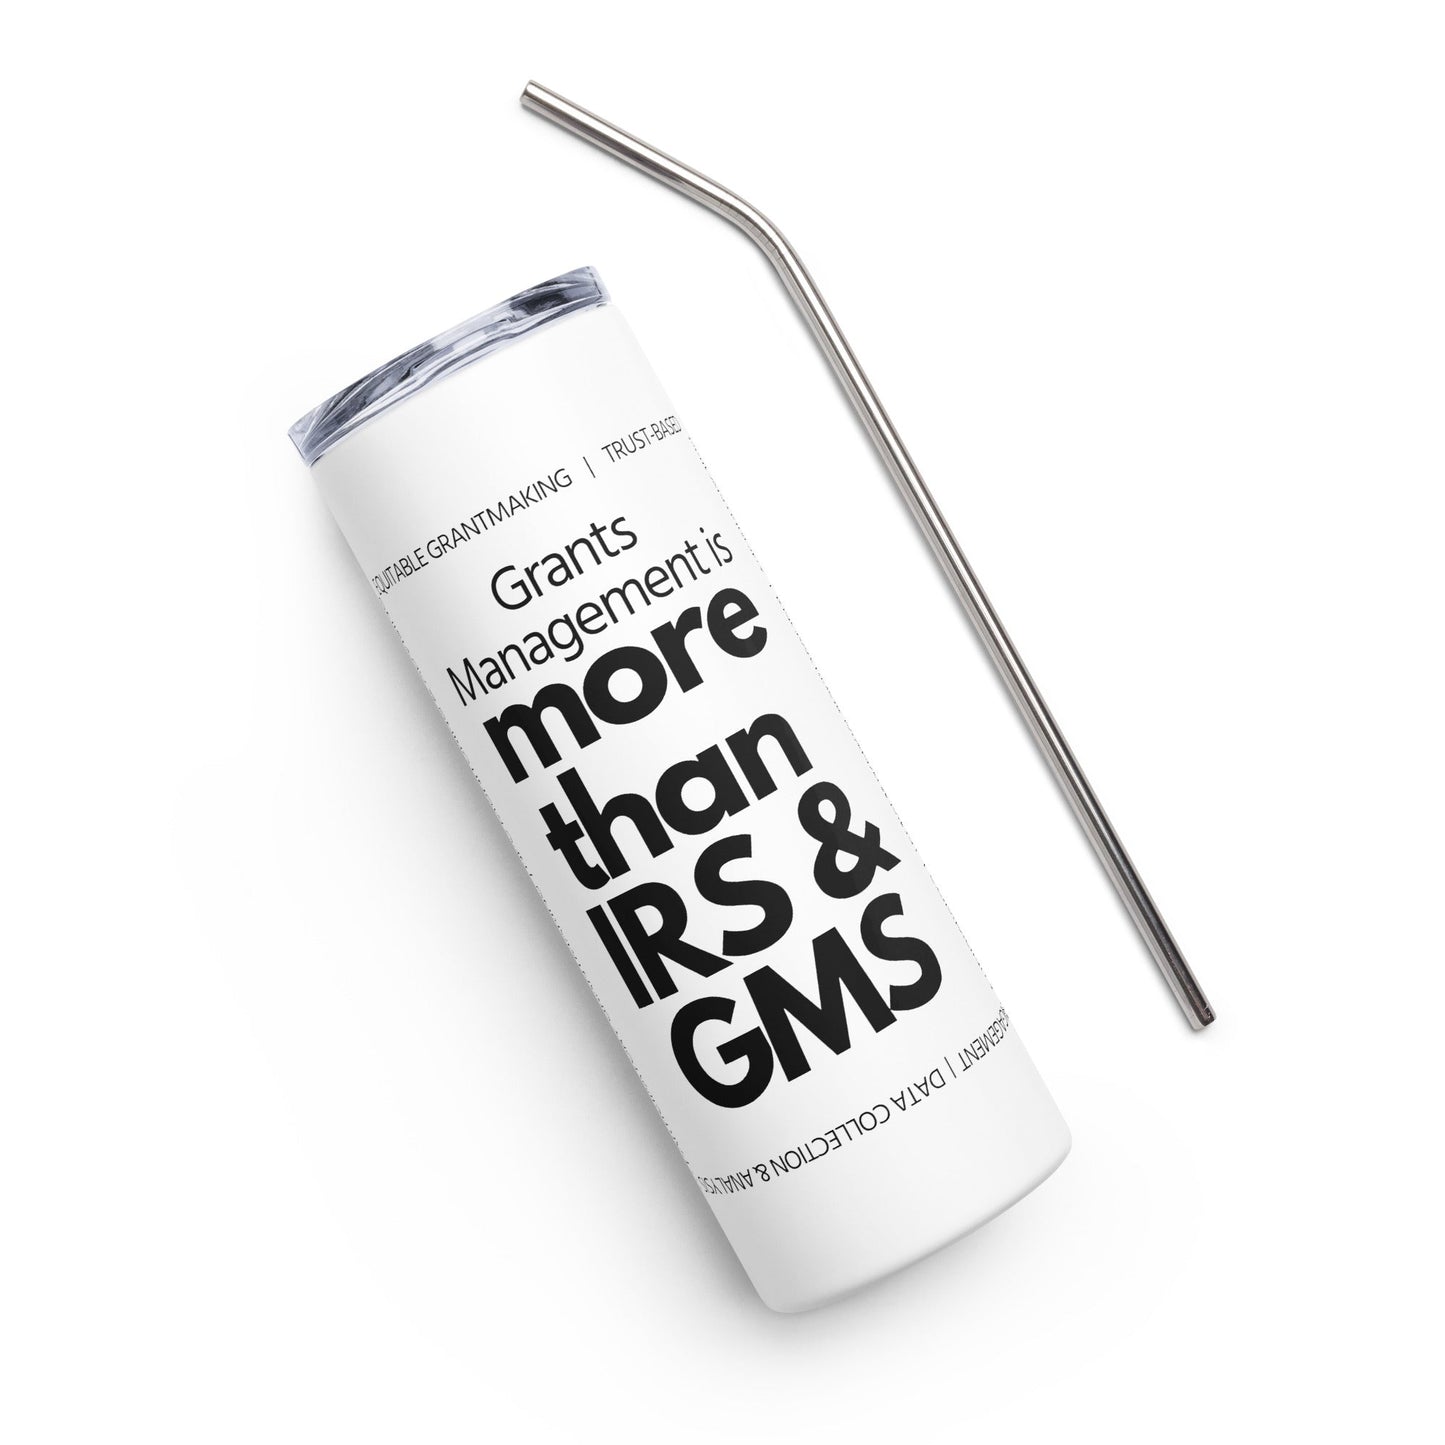 Grants Management is more than IRS & GMS Stainless steel tumbler-recalciGrant